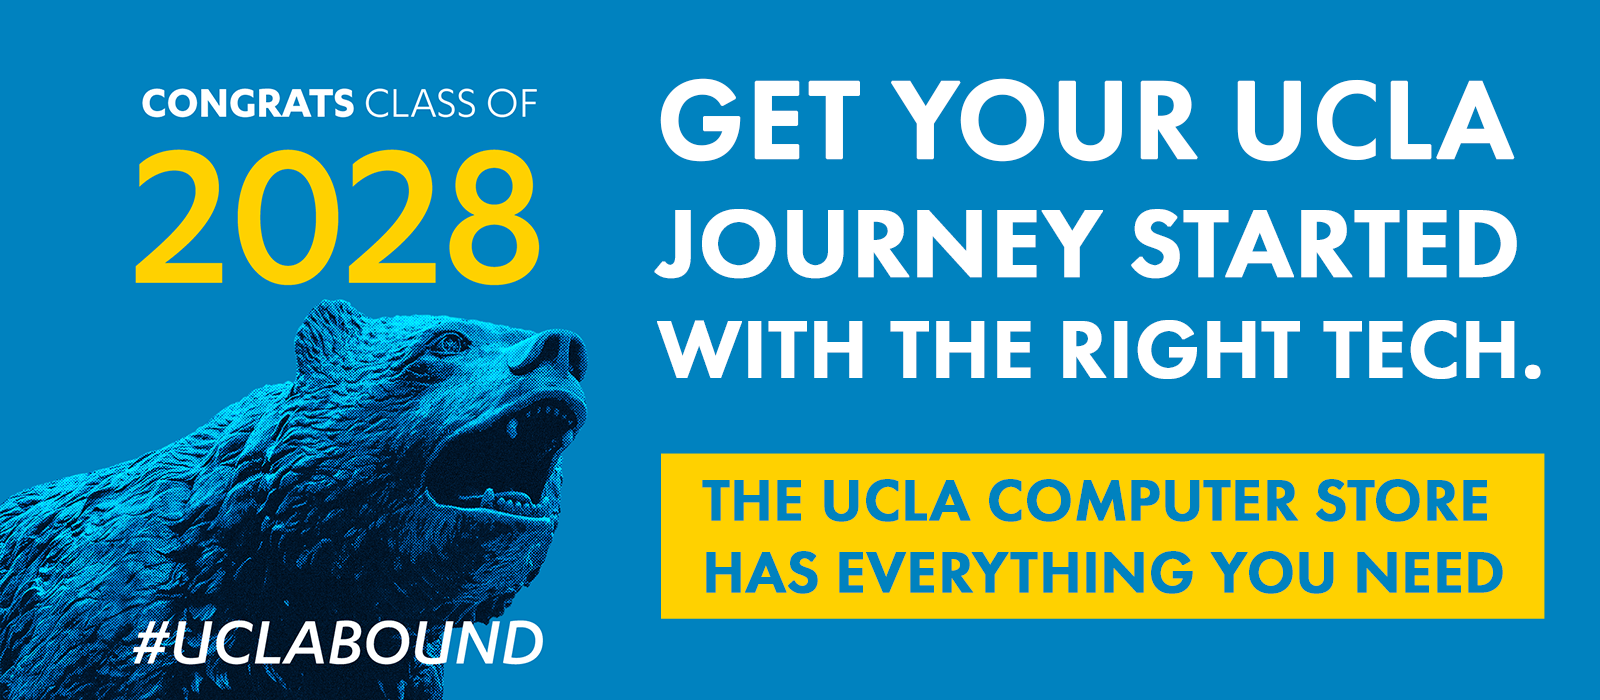 Congrats Class of 2020. Get your UCLA Journey started with the right tech. The UCLA Computer Store has Everything you need.